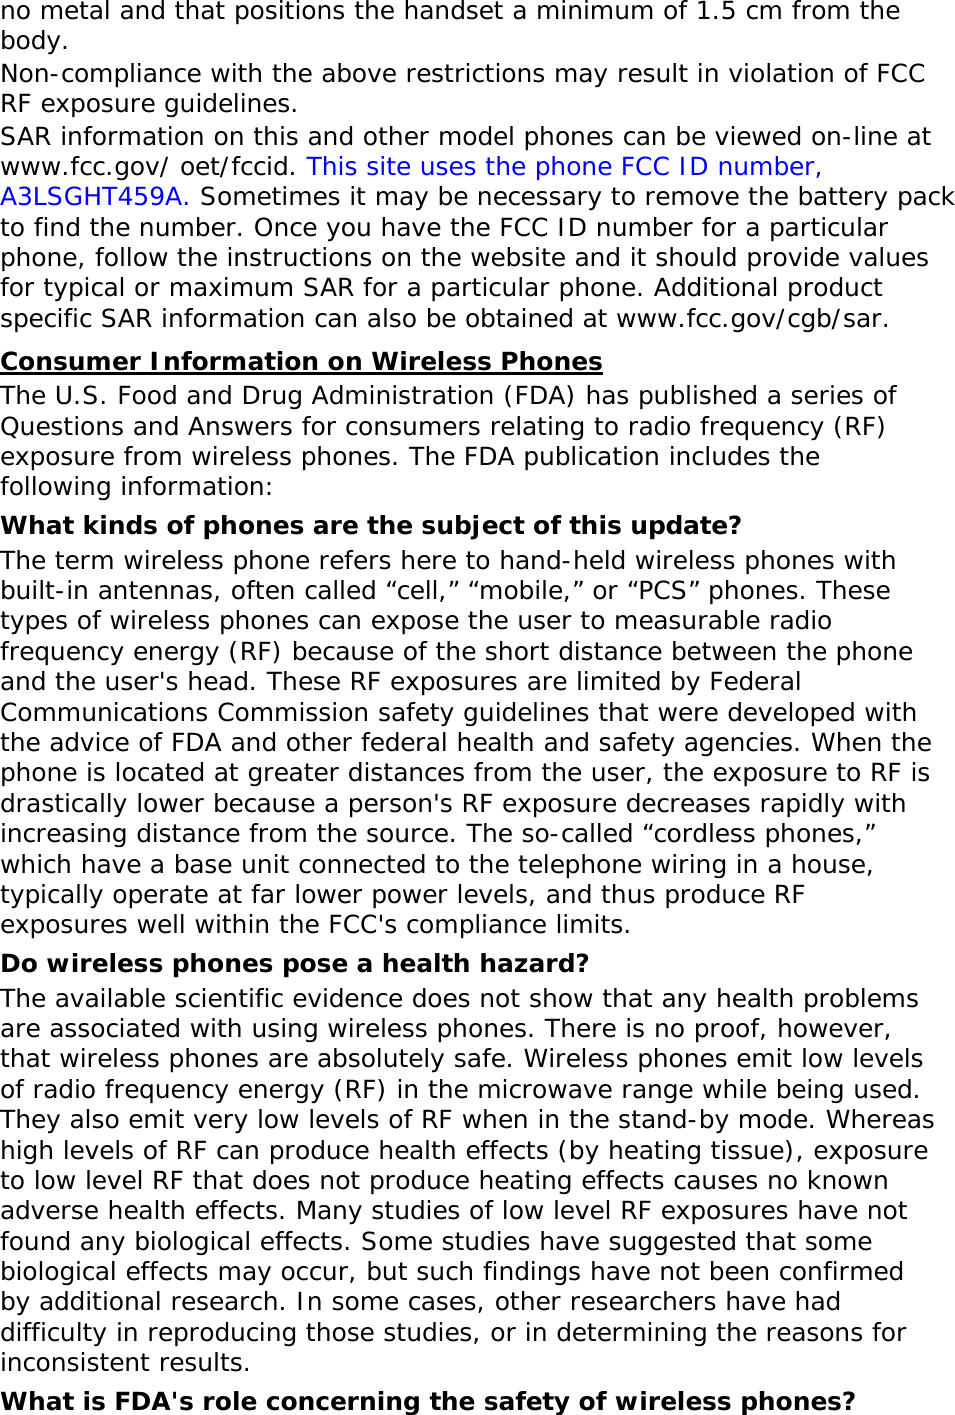 no metal and that positions the handset a minimum of 1.5 cm from the body.  Non-compliance with the above restrictions may result in violation of FCC RF exposure guidelines. SAR information on this and other model phones can be viewed on-line at www.fcc.gov/ oet/fccid. This site uses the phone FCC ID number, A3LSGHT459A. Sometimes it may be necessary to remove the battery pack to find the number. Once you have the FCC ID number for a particular phone, follow the instructions on the website and it should provide values for typical or maximum SAR for a particular phone. Additional product specific SAR information can also be obtained at www.fcc.gov/cgb/sar. Consumer Information on Wireless Phones The U.S. Food and Drug Administration (FDA) has published a series of Questions and Answers for consumers relating to radio frequency (RF) exposure from wireless phones. The FDA publication includes the following information: What kinds of phones are the subject of this update? The term wireless phone refers here to hand-held wireless phones with built-in antennas, often called “cell,” “mobile,” or “PCS” phones. These types of wireless phones can expose the user to measurable radio frequency energy (RF) because of the short distance between the phone and the user&apos;s head. These RF exposures are limited by Federal Communications Commission safety guidelines that were developed with the advice of FDA and other federal health and safety agencies. When the phone is located at greater distances from the user, the exposure to RF is drastically lower because a person&apos;s RF exposure decreases rapidly with increasing distance from the source. The so-called “cordless phones,” which have a base unit connected to the telephone wiring in a house, typically operate at far lower power levels, and thus produce RF exposures well within the FCC&apos;s compliance limits. Do wireless phones pose a health hazard? The available scientific evidence does not show that any health problems are associated with using wireless phones. There is no proof, however, that wireless phones are absolutely safe. Wireless phones emit low levels of radio frequency energy (RF) in the microwave range while being used. They also emit very low levels of RF when in the stand-by mode. Whereas high levels of RF can produce health effects (by heating tissue), exposure to low level RF that does not produce heating effects causes no known adverse health effects. Many studies of low level RF exposures have not found any biological effects. Some studies have suggested that some biological effects may occur, but such findings have not been confirmed by additional research. In some cases, other researchers have had difficulty in reproducing those studies, or in determining the reasons for inconsistent results. What is FDA&apos;s role concerning the safety of wireless phones? 